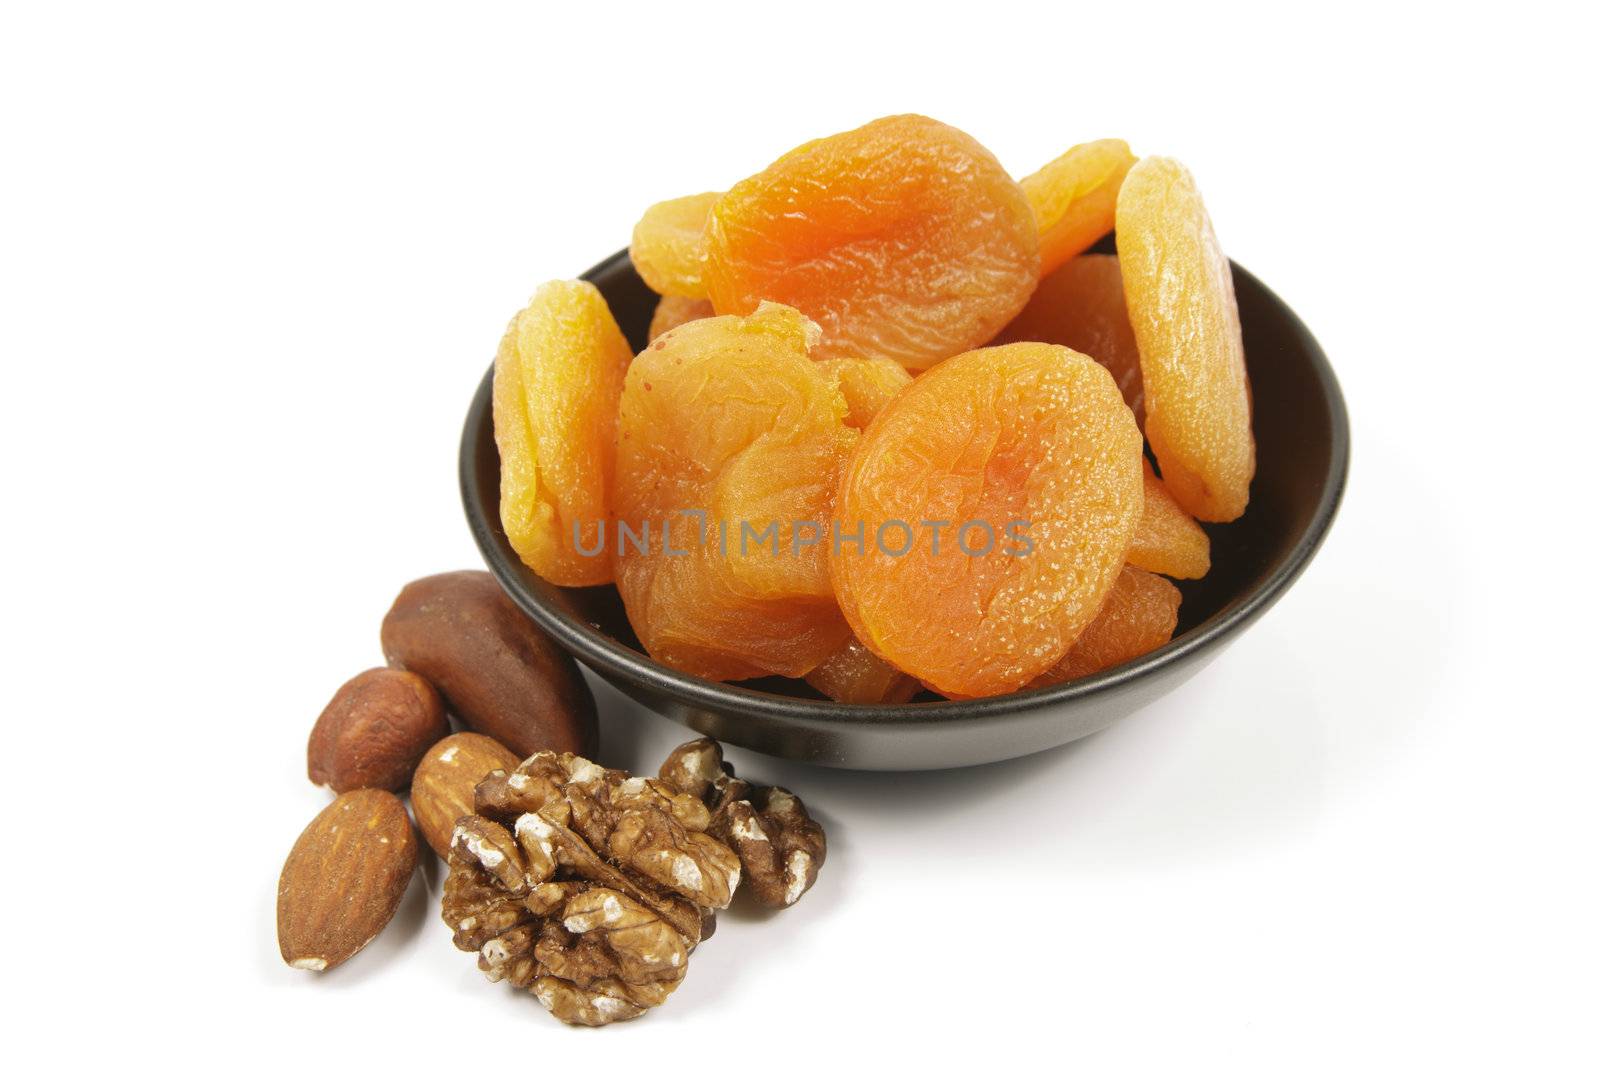 Dried Apricots and Nuts by KeithWilson